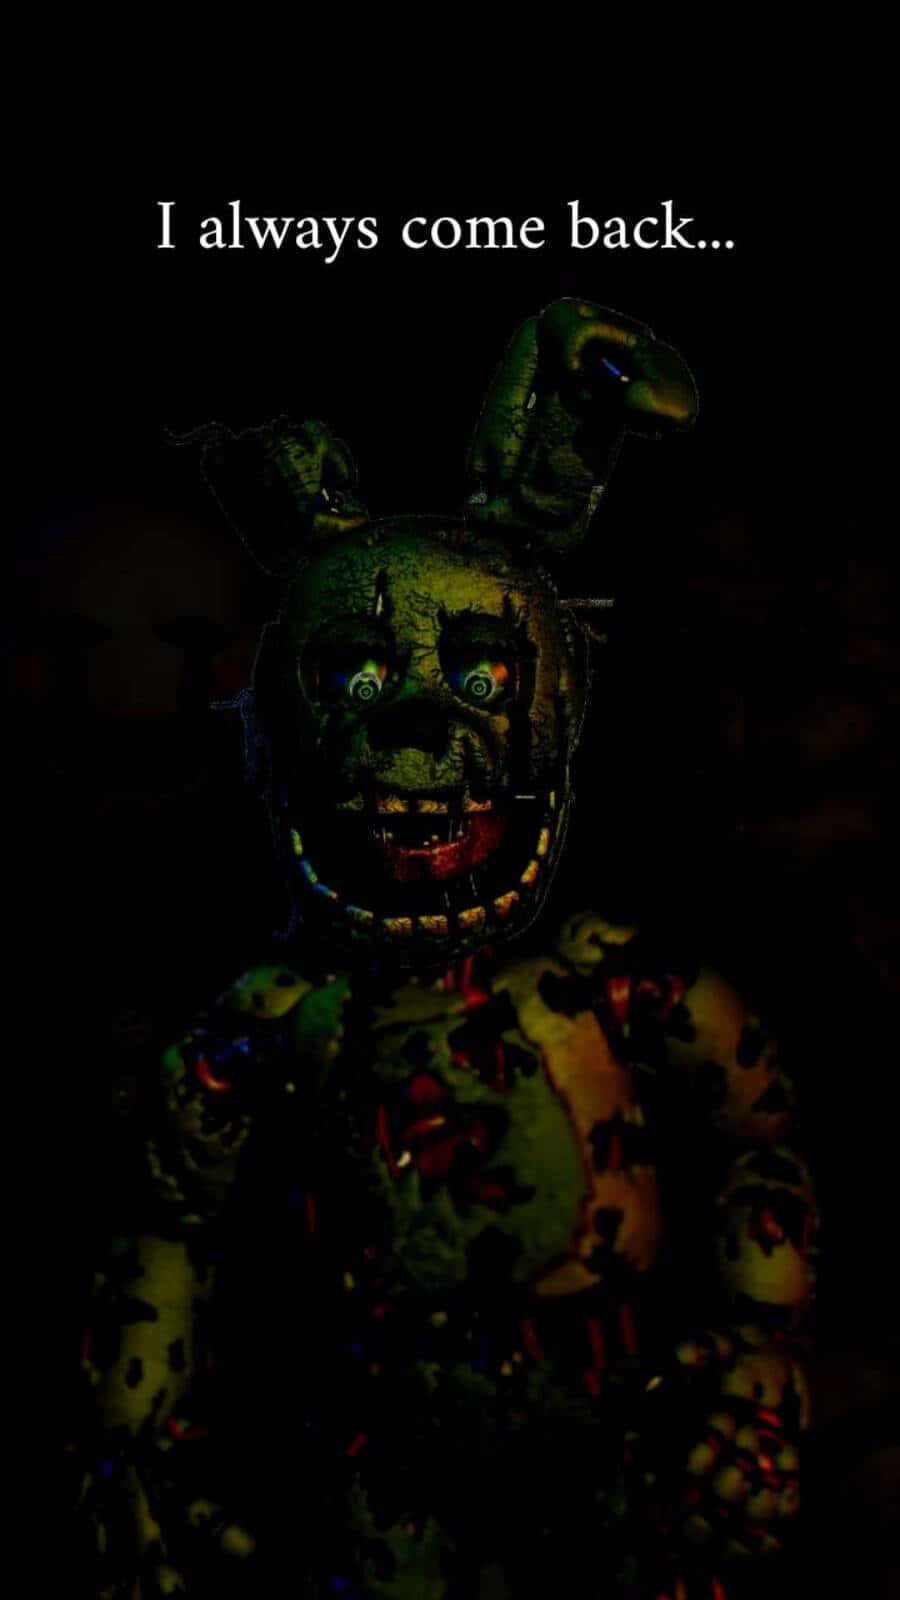 Springtrap in action: Spooky and mysterious character from Five Nights at Freddy's Wallpaper